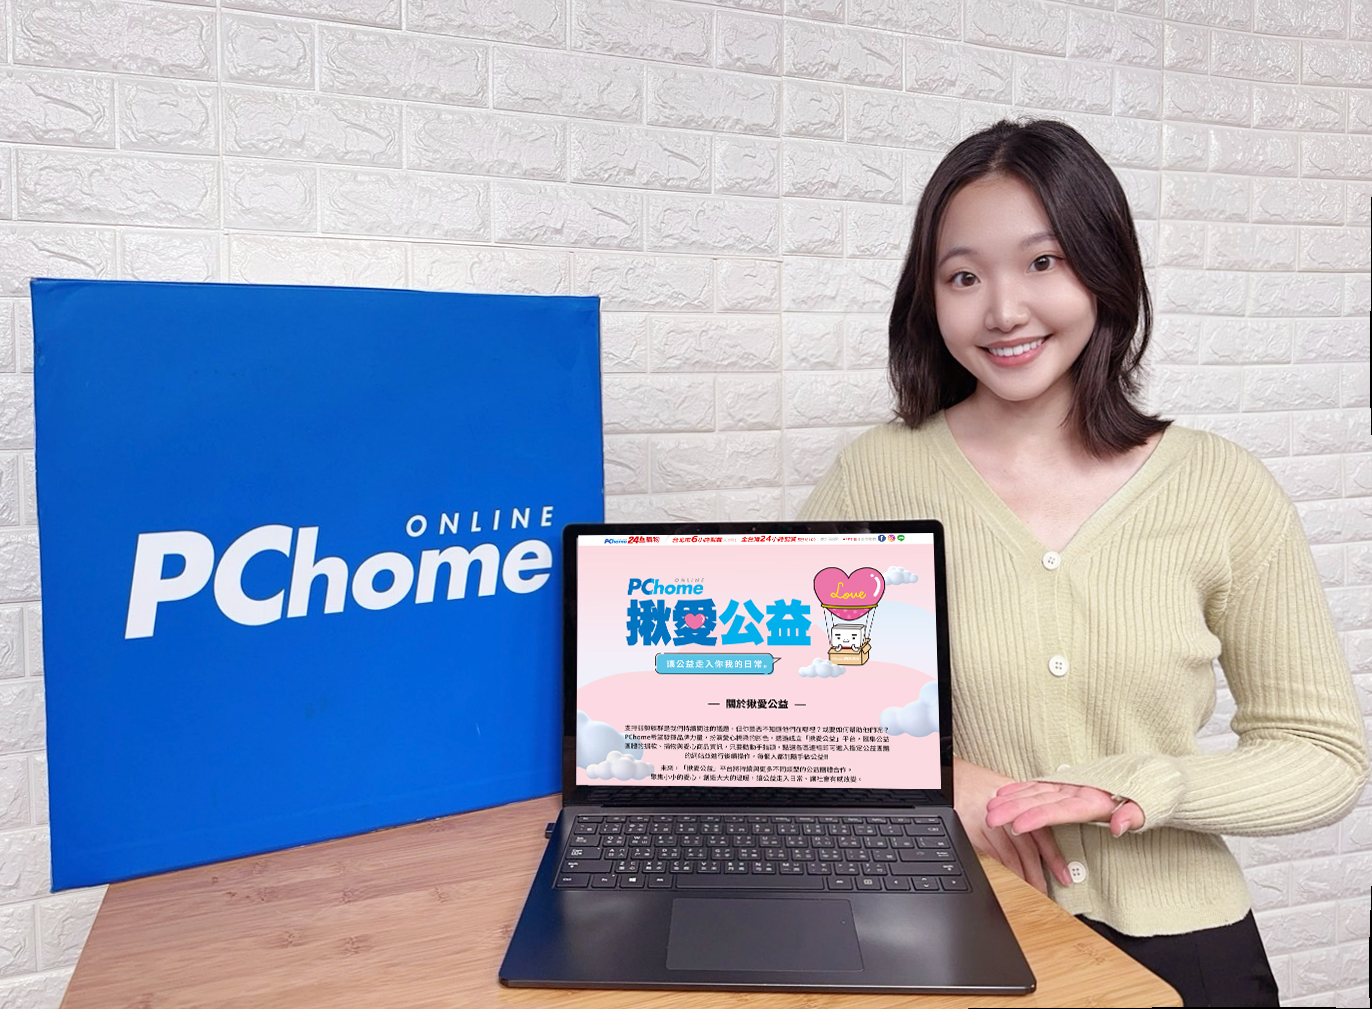 PChome Online Officially Launches the "PChome Love Charity Online Platform"